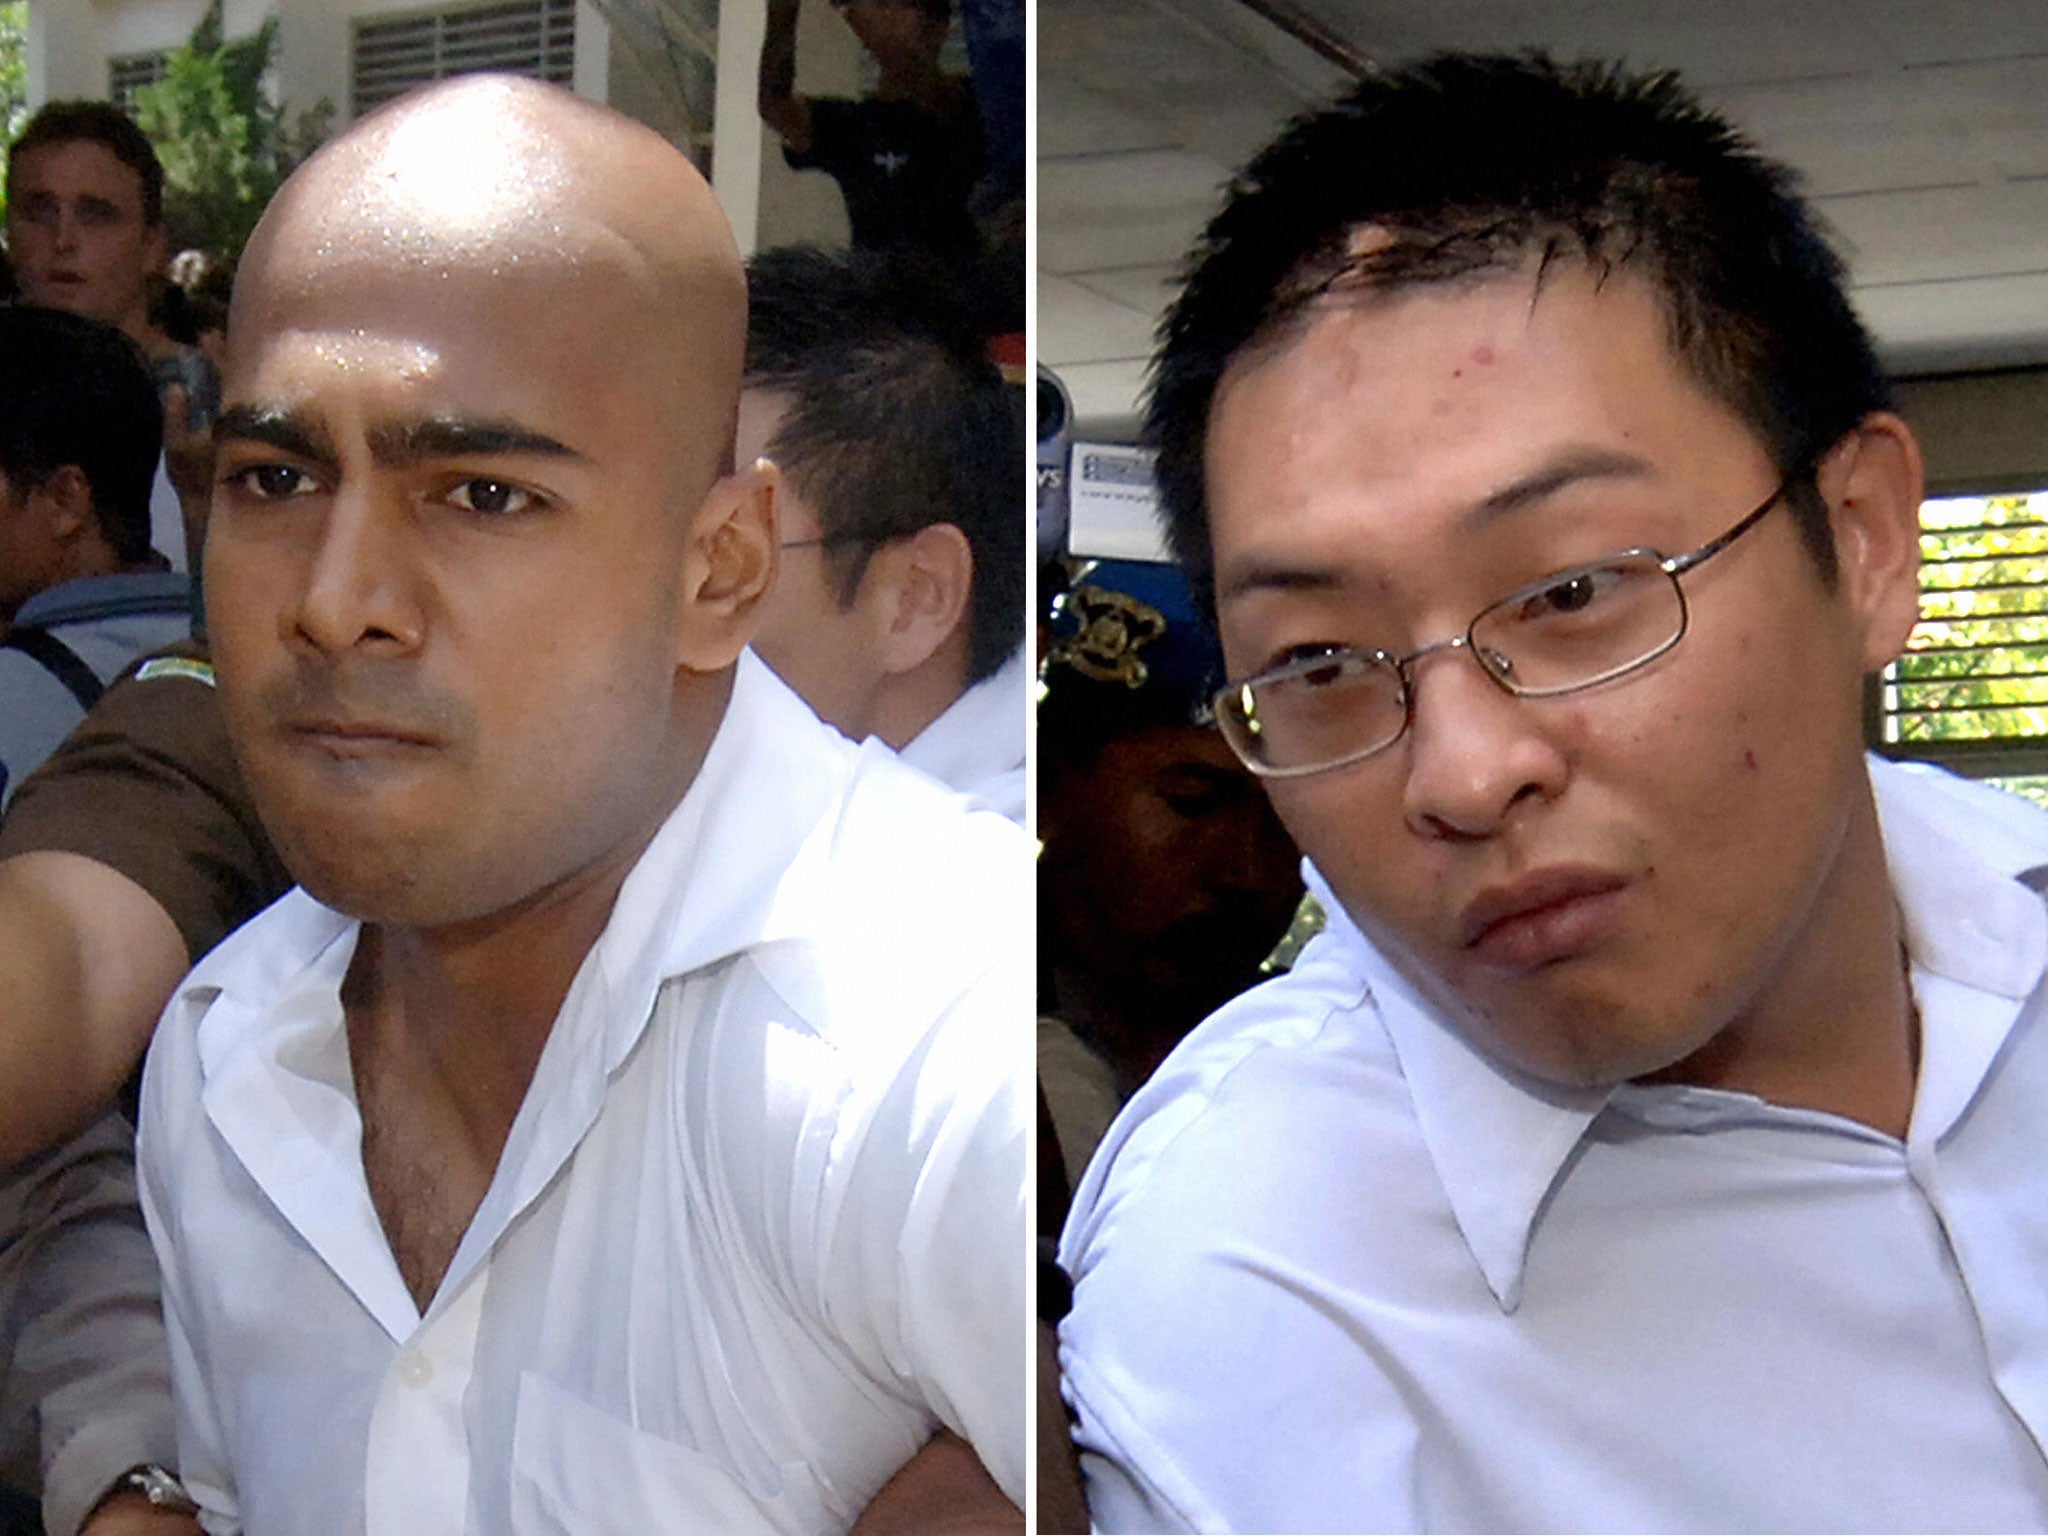 Australians Myuran Sukumaran (left) and Andrew Chan (right), the two ringleaders of the 'Bali Nine' drug ring, pictured being escorted out of court in 2006. 14 February 2006. The Indonesian court issued death sentences for Australian's Chan and Sukumaran